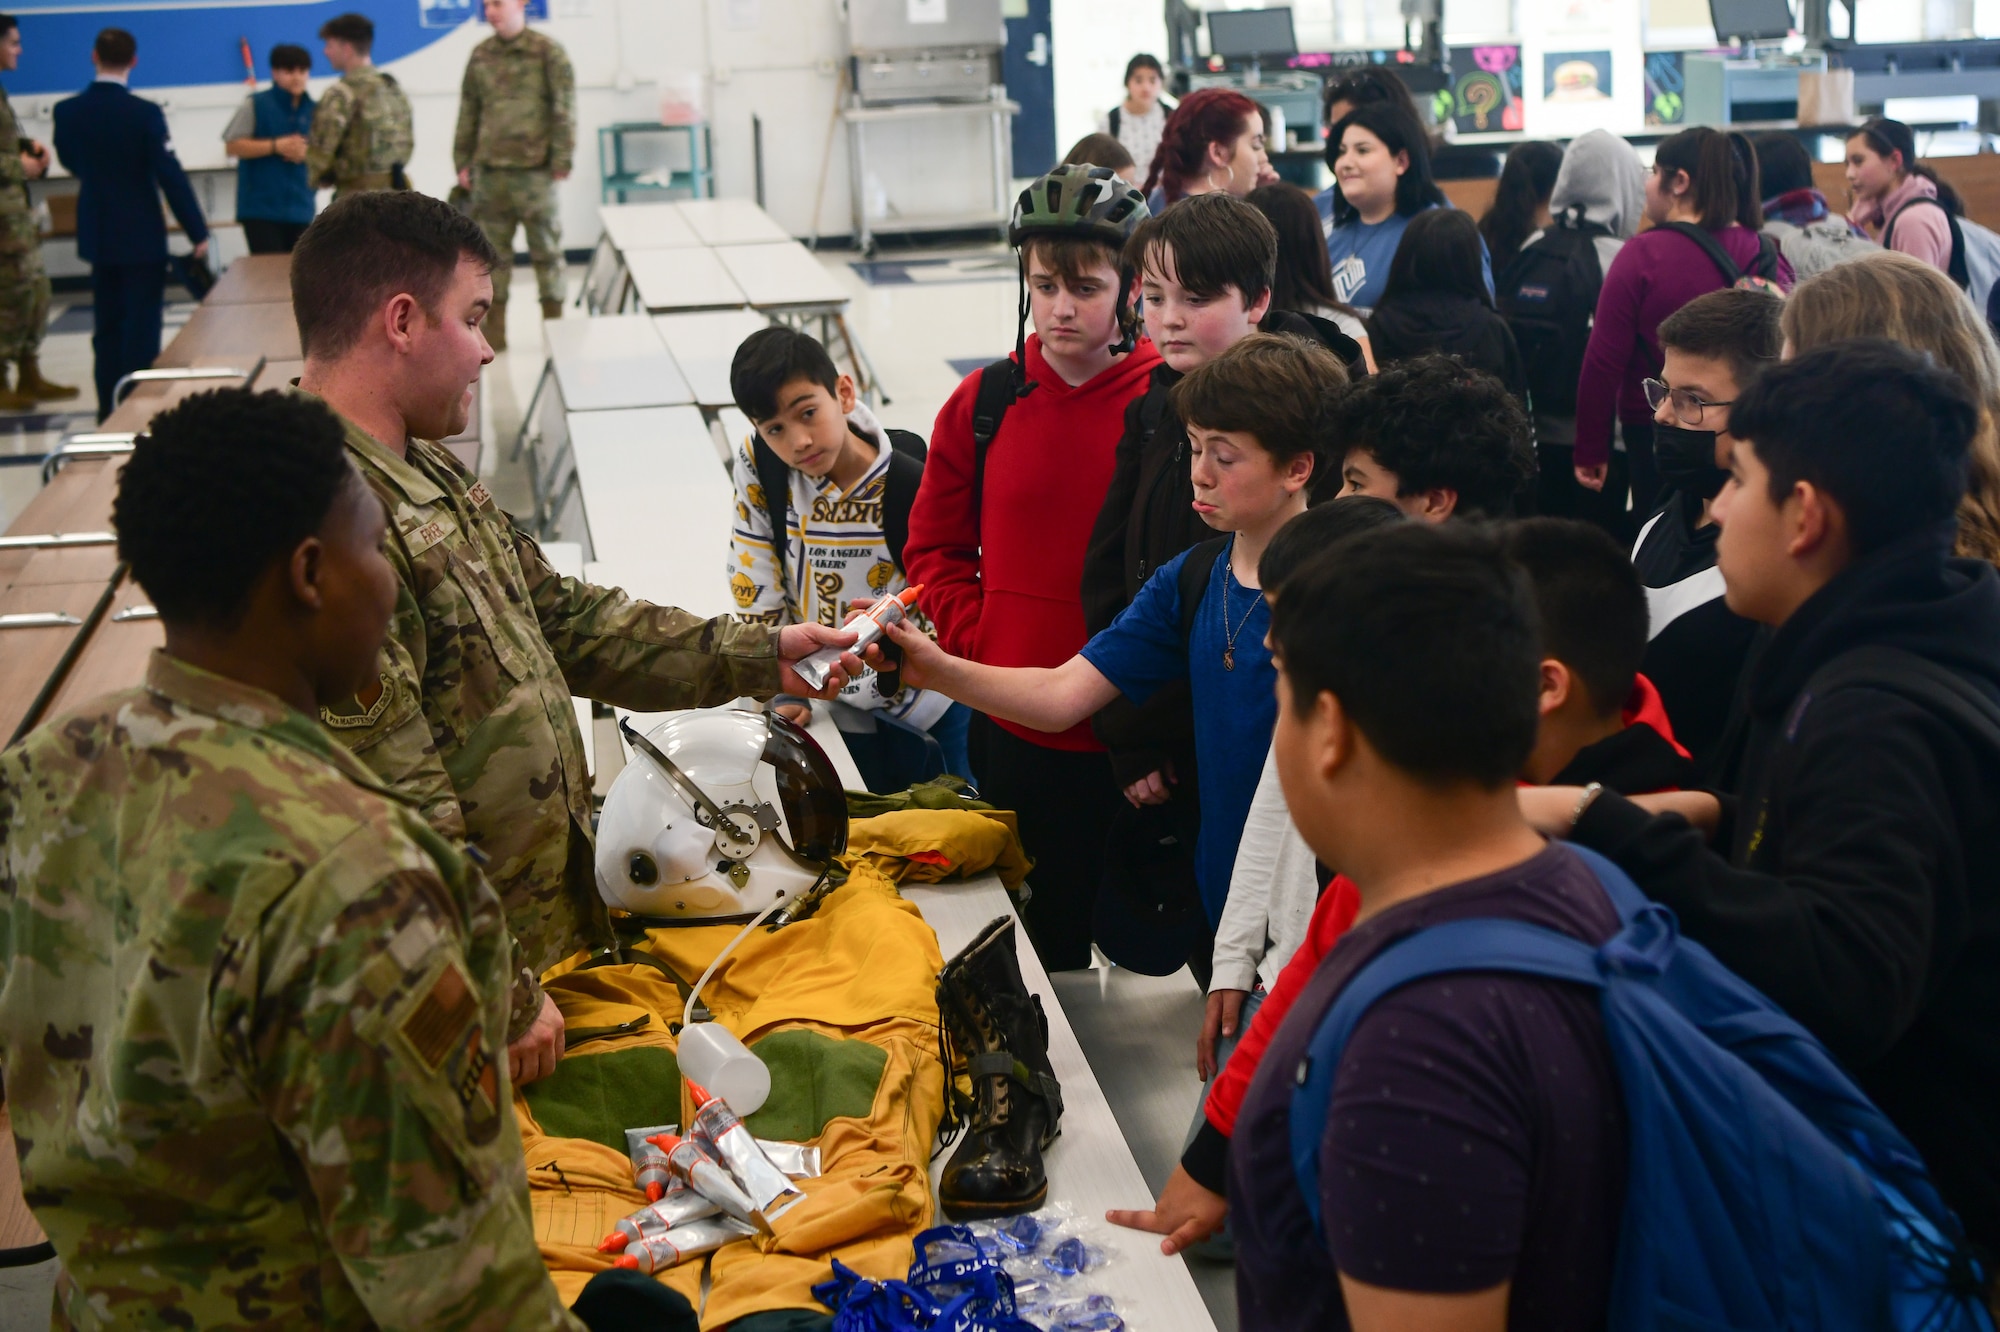 Members from Beale Air Force Base display a U-2 Dragon Lady full pressure suit at Redwood Middle School in Napa, Calif., on Jan. 25, 2023